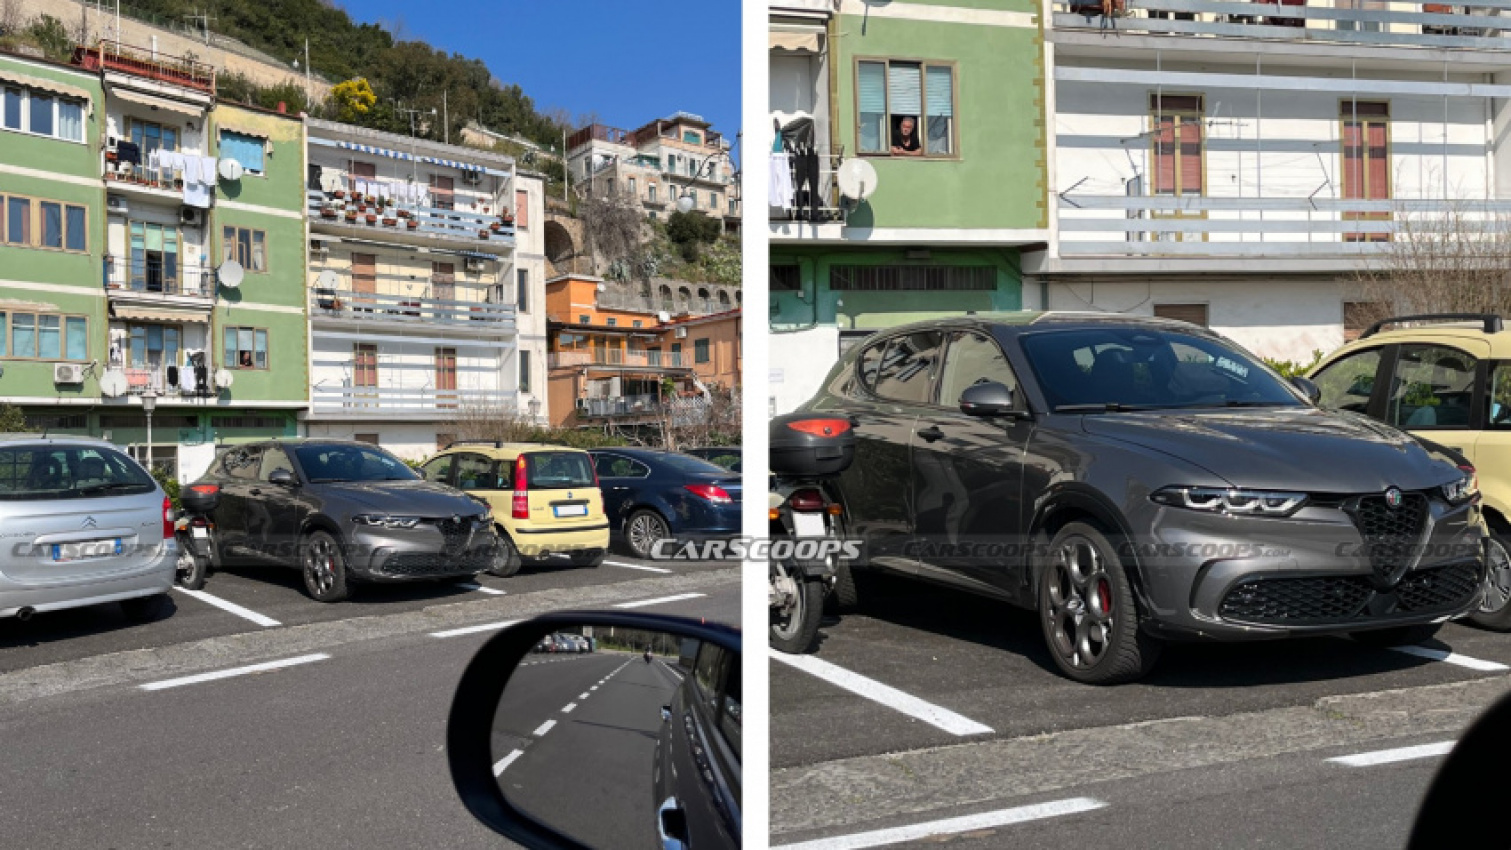 alfa romeo, autos, cars, news, alfa romeo scoops, alfa romeo tonale, scoops, alfa romeo tonale spotted in italy just in time for valentine’s day